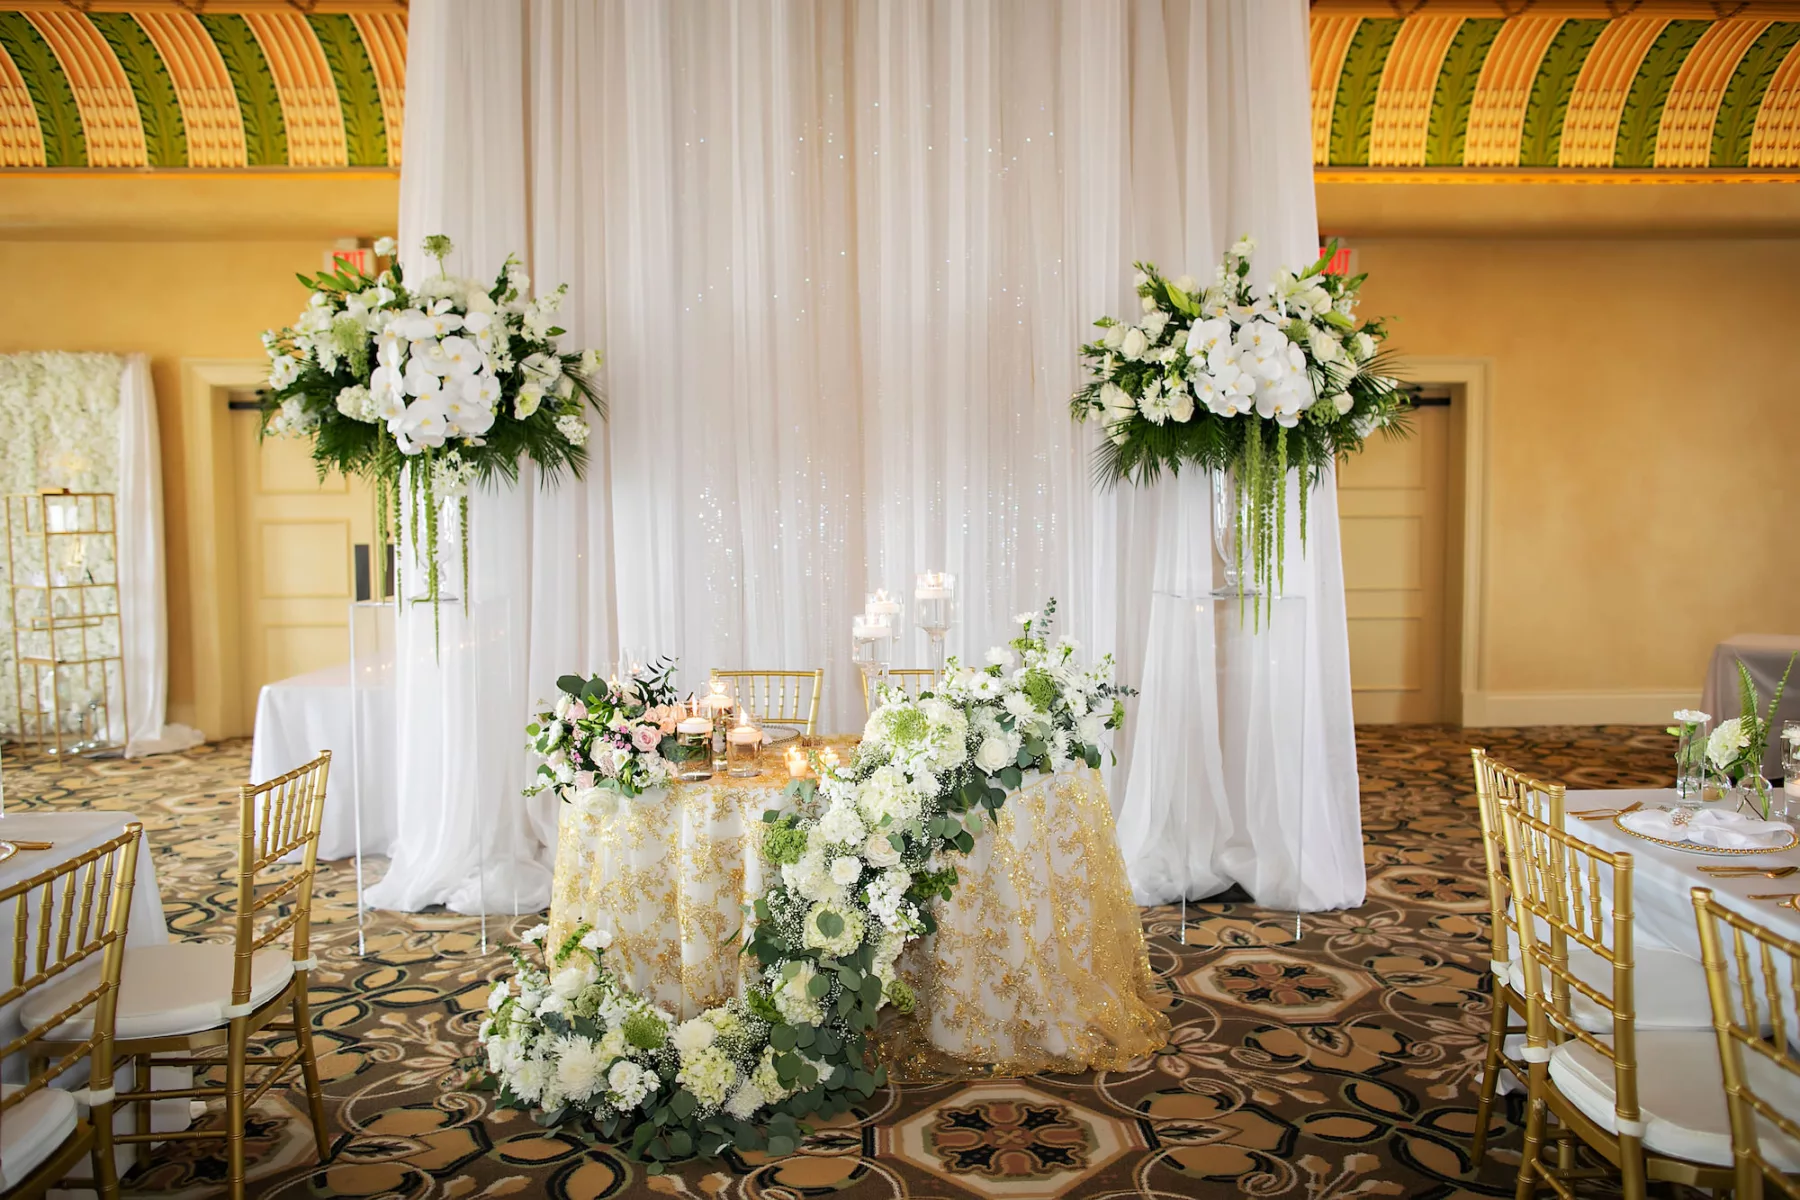 Classic White Wedding Reception Decor Ideas | White Drapery Sweetheart Table Backdrop Inspiration | Gold Sequin Tablecloth | White Orchid, Baby's Breath, Roses, and Greenery Floral Arrangement Ideas | Tampa Bay Event Planner Coastal Coordinating